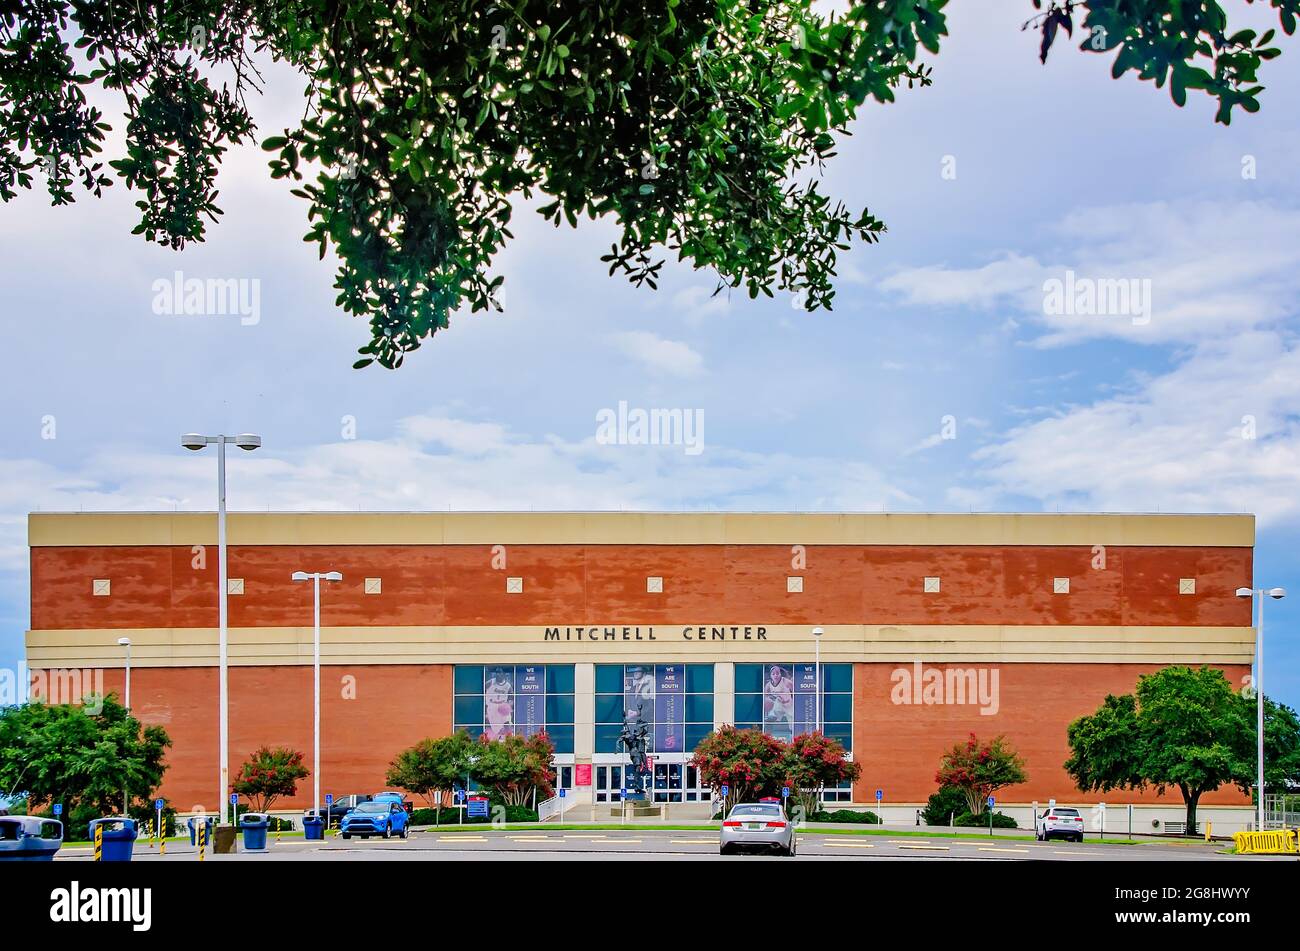 The Mitchell Center is pictured at the University of South Alabama, July 18, 2021, in Mobile, Alabama. Stock Photo